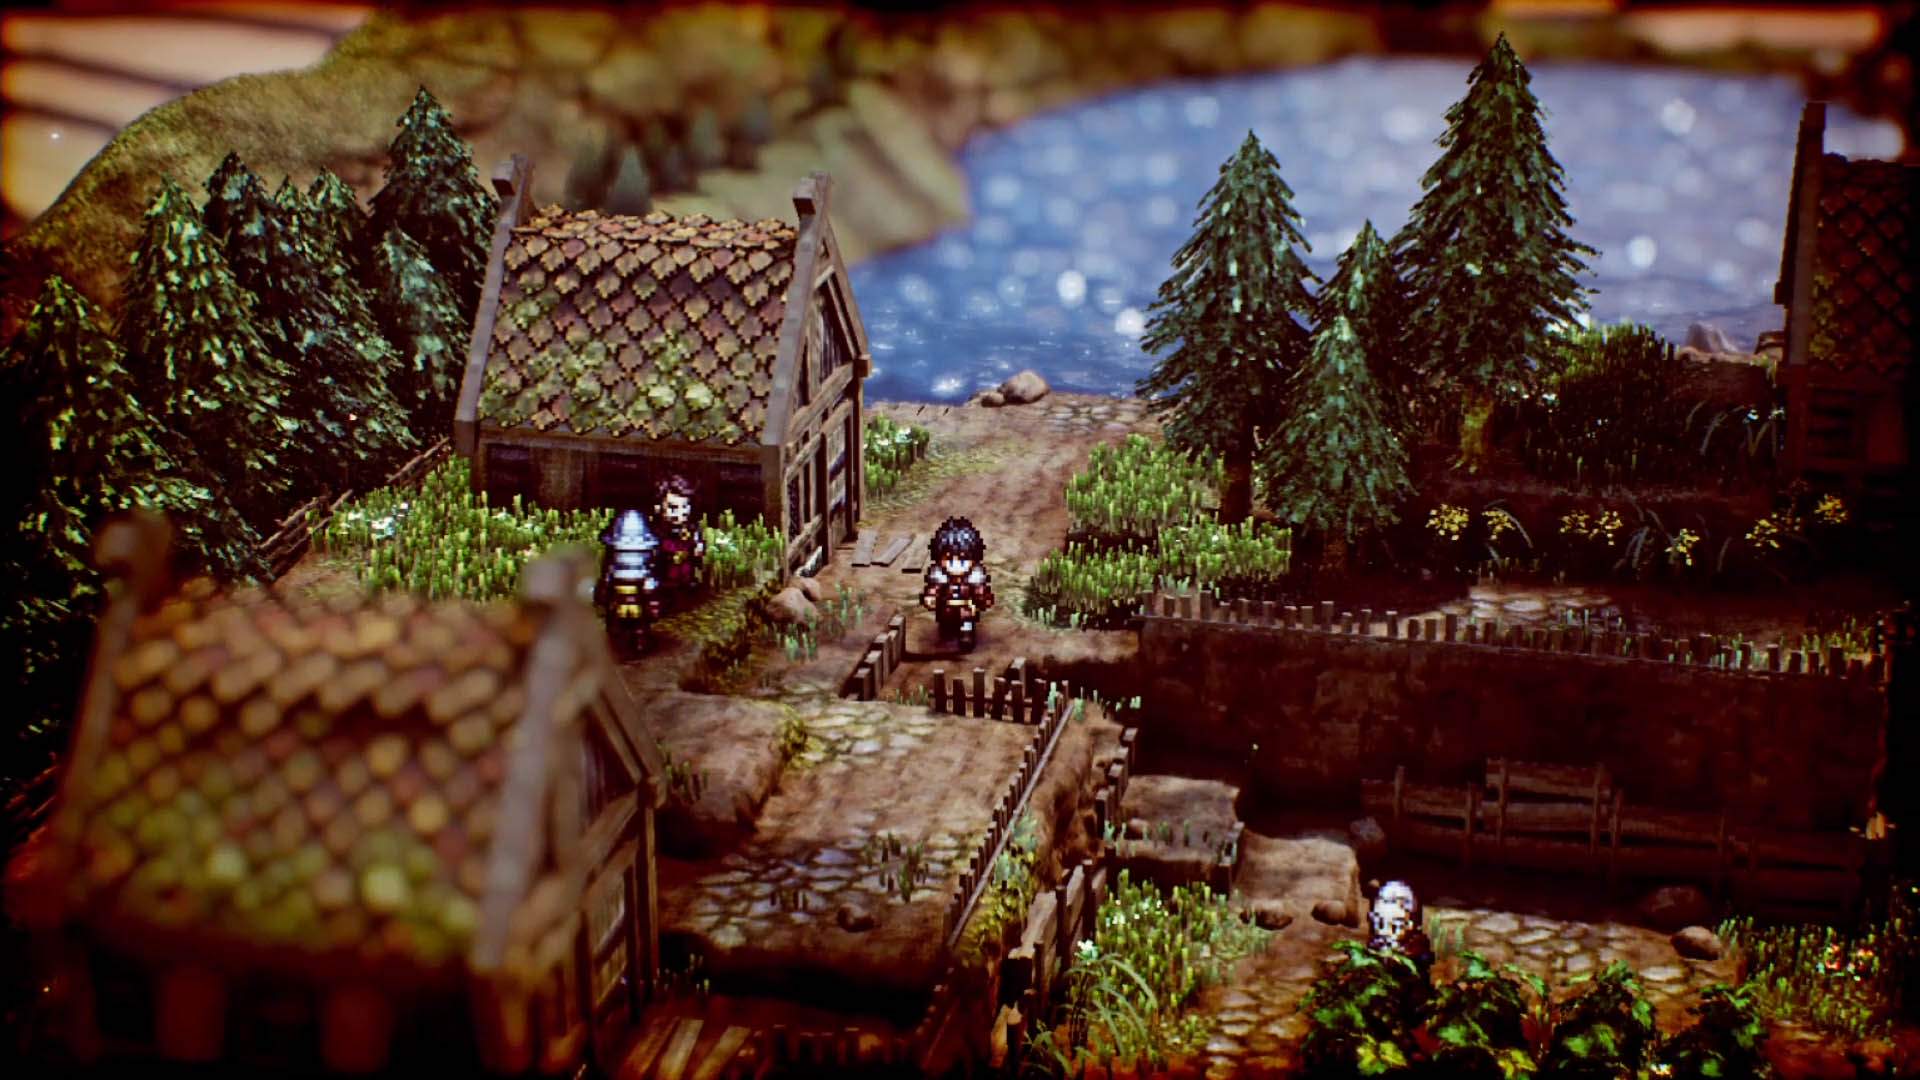 Gameplay screenshot depicting Serenoa standing in the middle of a town